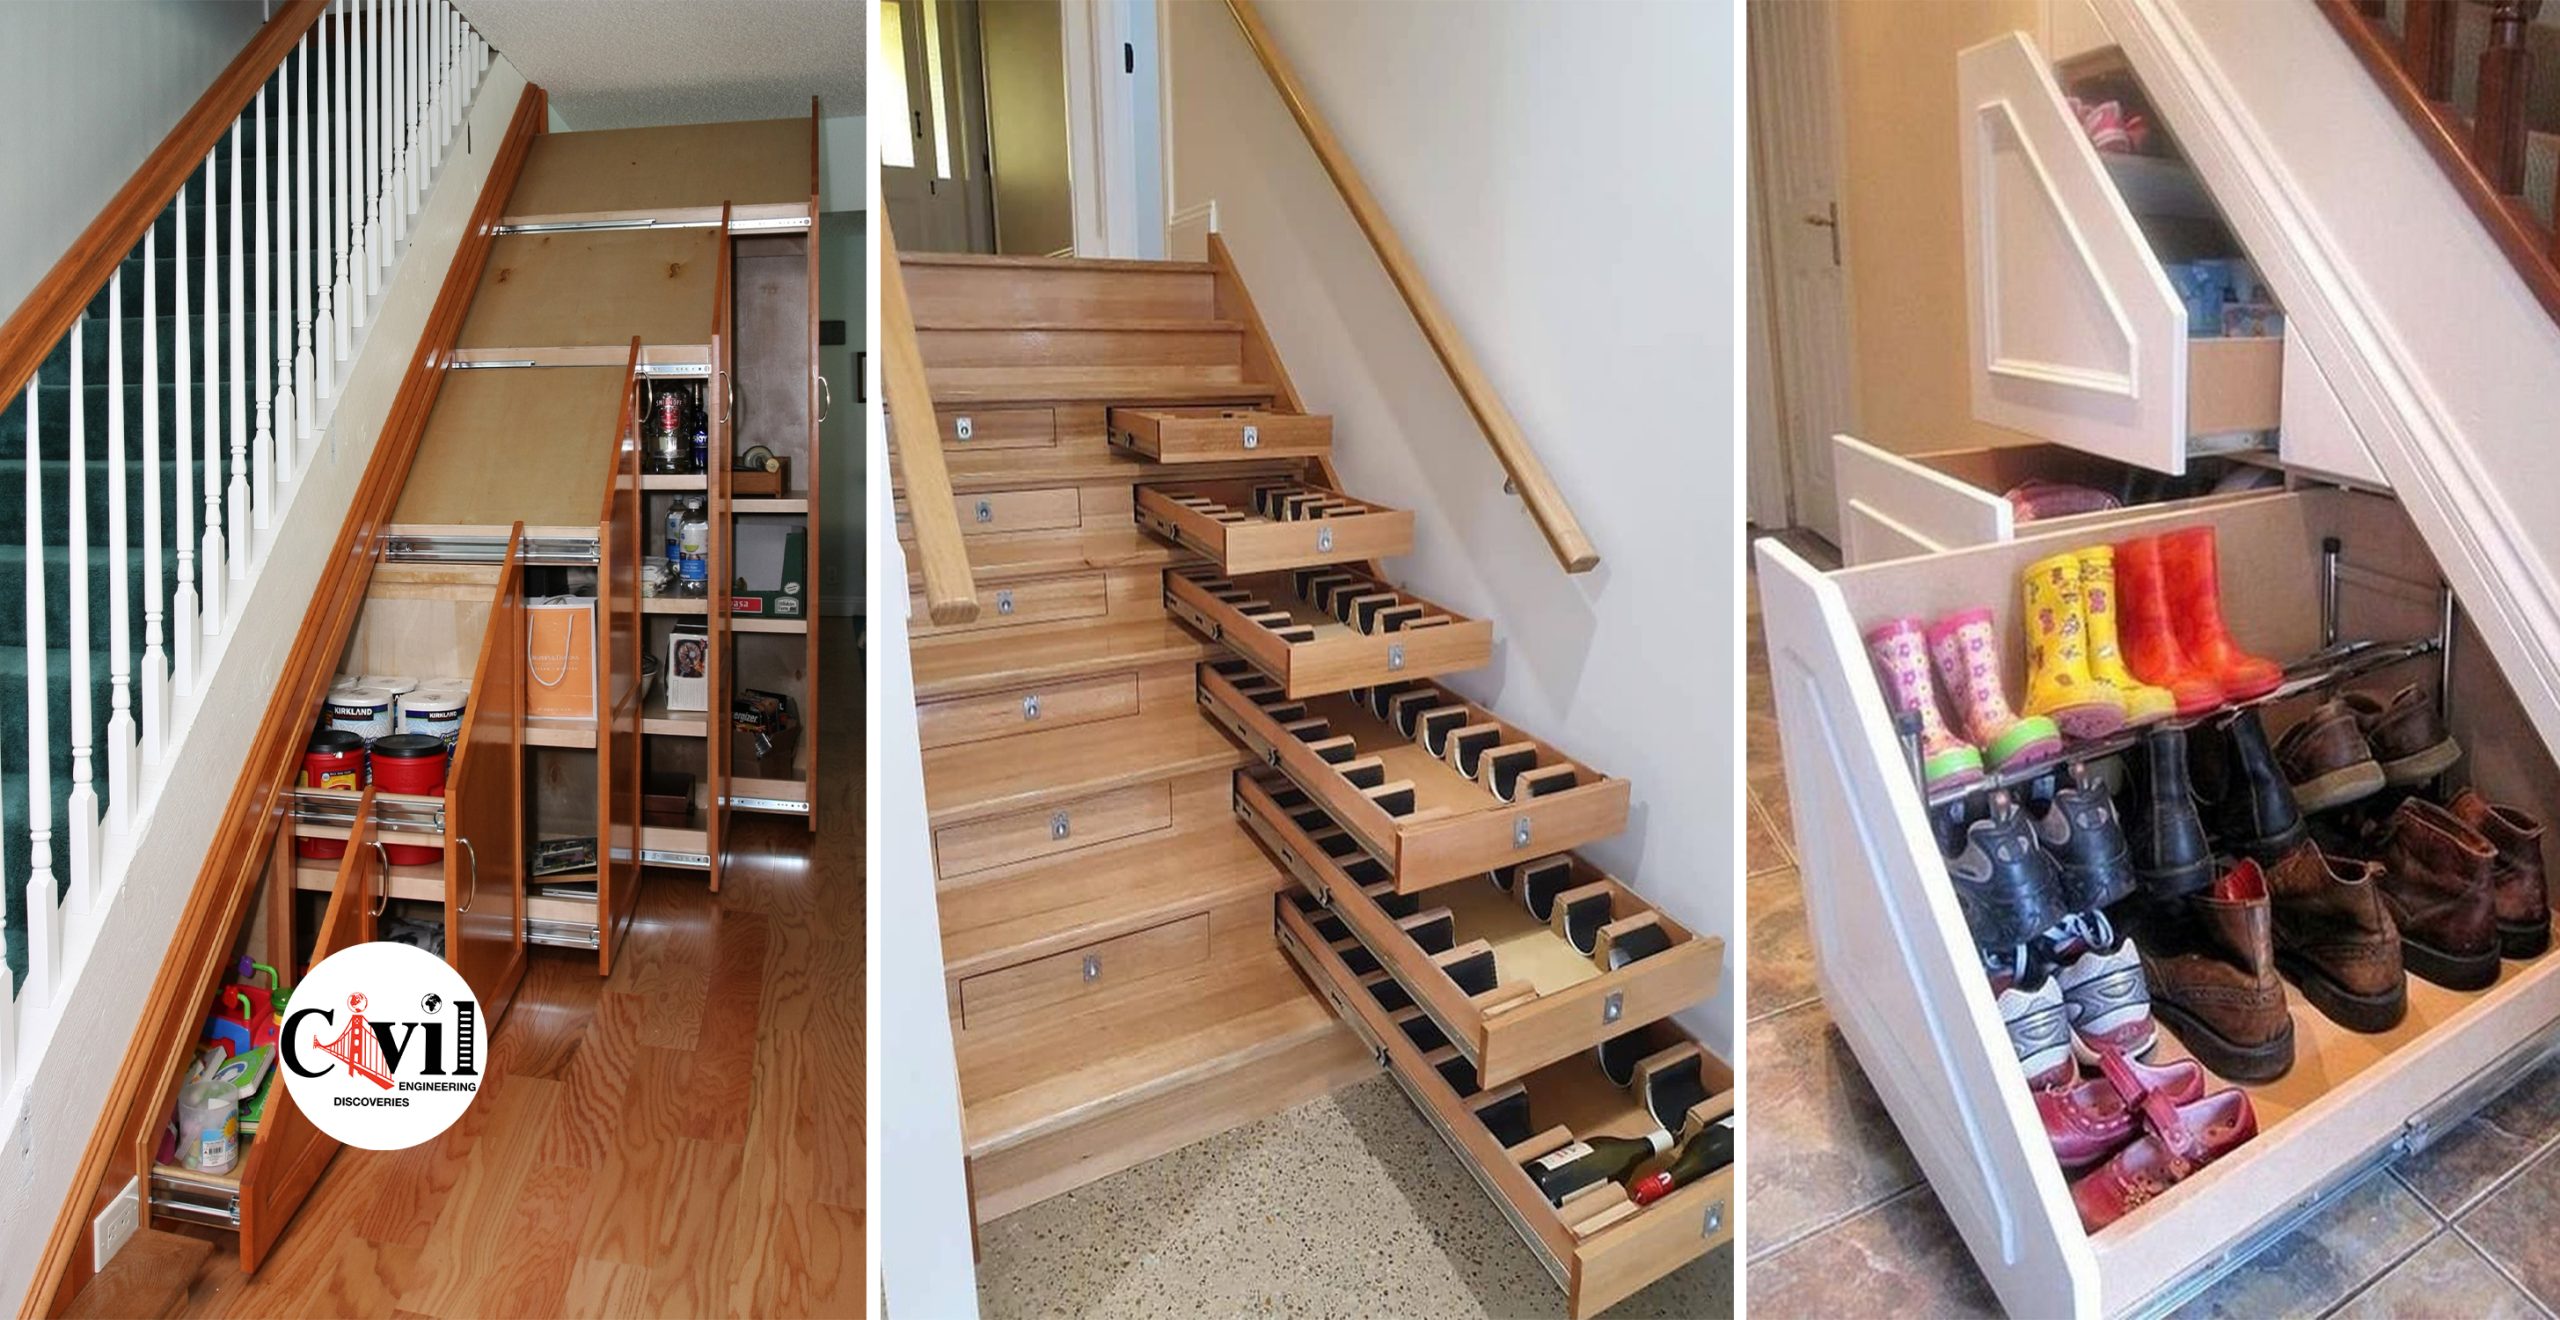 22 Stylish Under-Stair Storage Ideas to Maximize Space